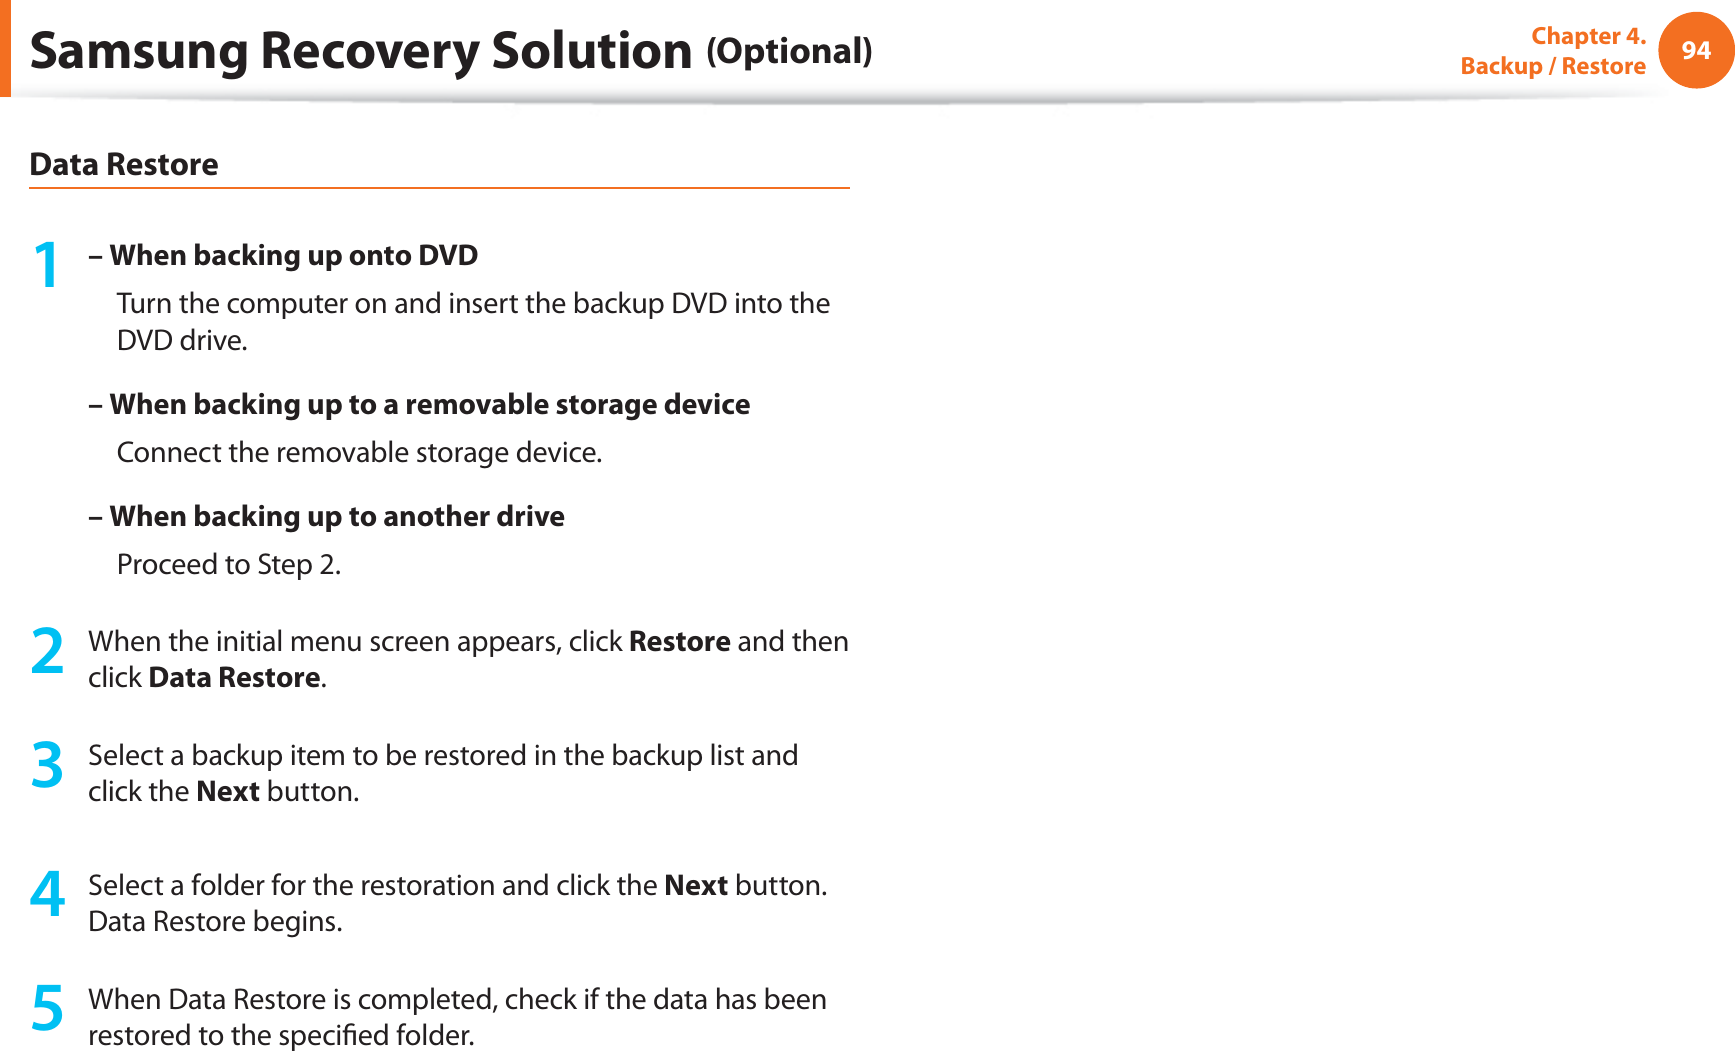 94Chapter 4.   Backup / RestoreData Restore1 – When backing up onto DVD     Turn the computer on and insert the backup DVD into the DVD drive.– When backing up to a removable storage device     Connect the removable storage device.–  When backing up to another drive     Proceed to Step 2.2  When the initial menu screen appears, click Restore and then click Data Restore.3  Select a backup item to be restored in the backup list and click the Next button.4  Select a folder for the restoration and click the Next button. Data Restore begins.5  When Data Restore is completed, check if the data has been restored to the speciﬁed folder.Samsung Recovery Solution (Optional)